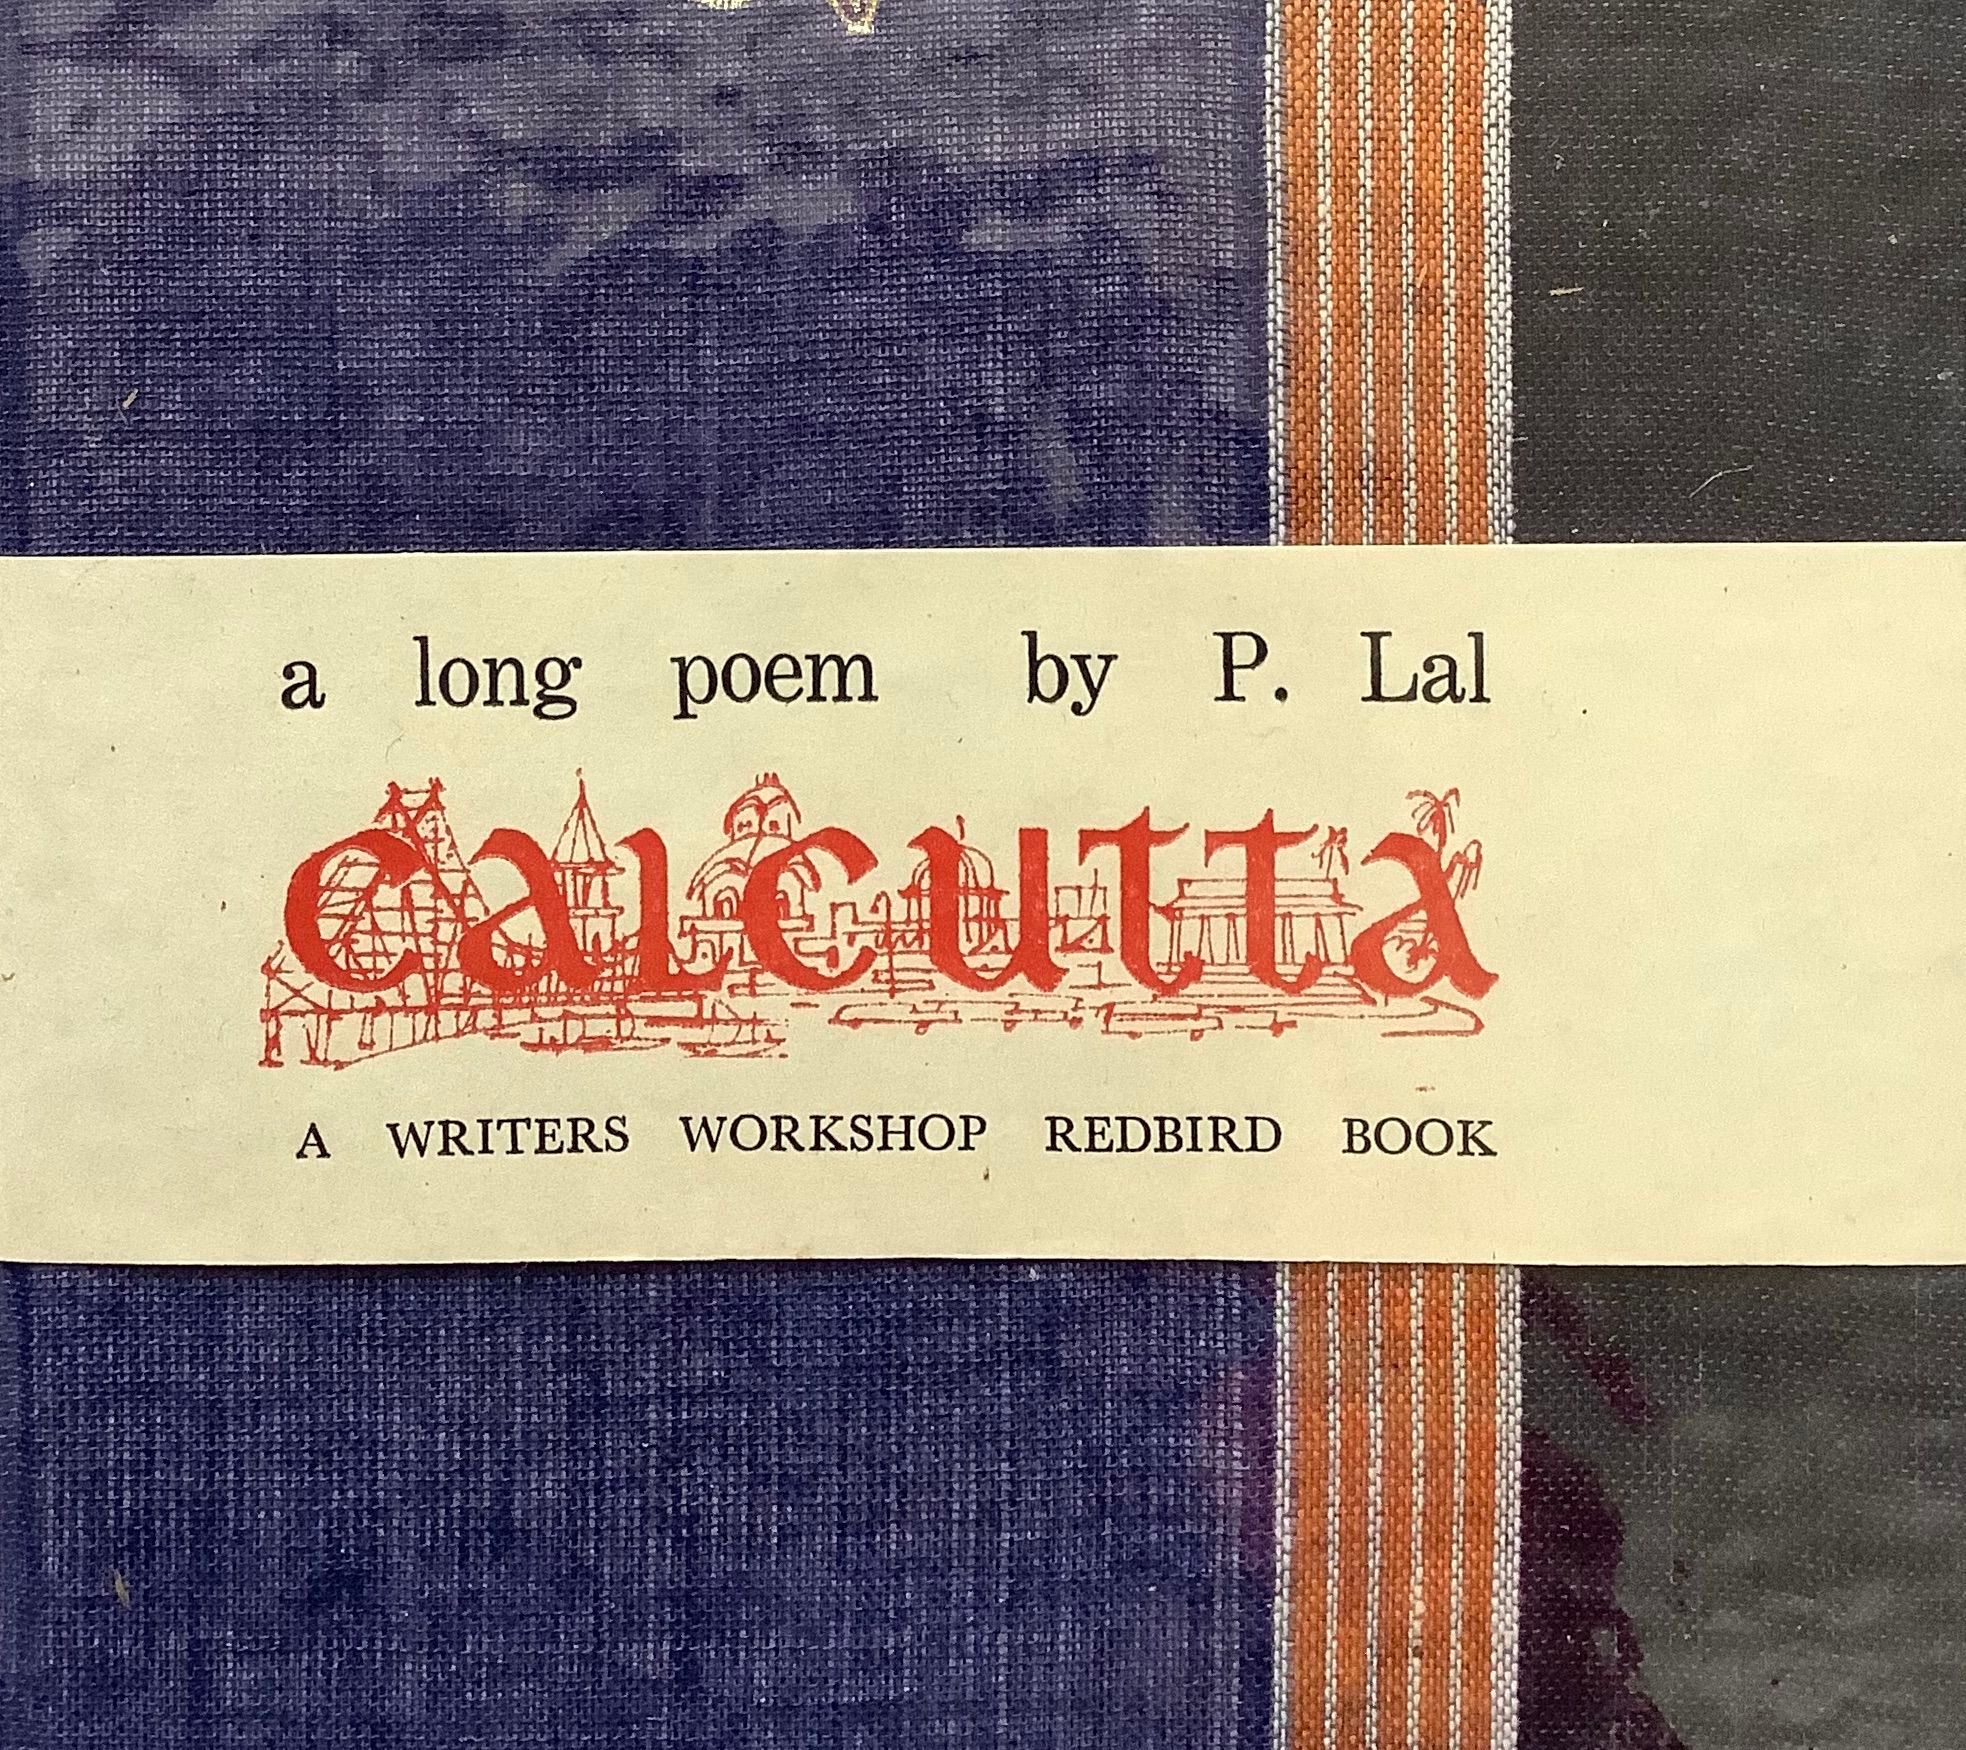 Another Look at India’s Books: P. Lal’s “Calcutta: A Long Poem”